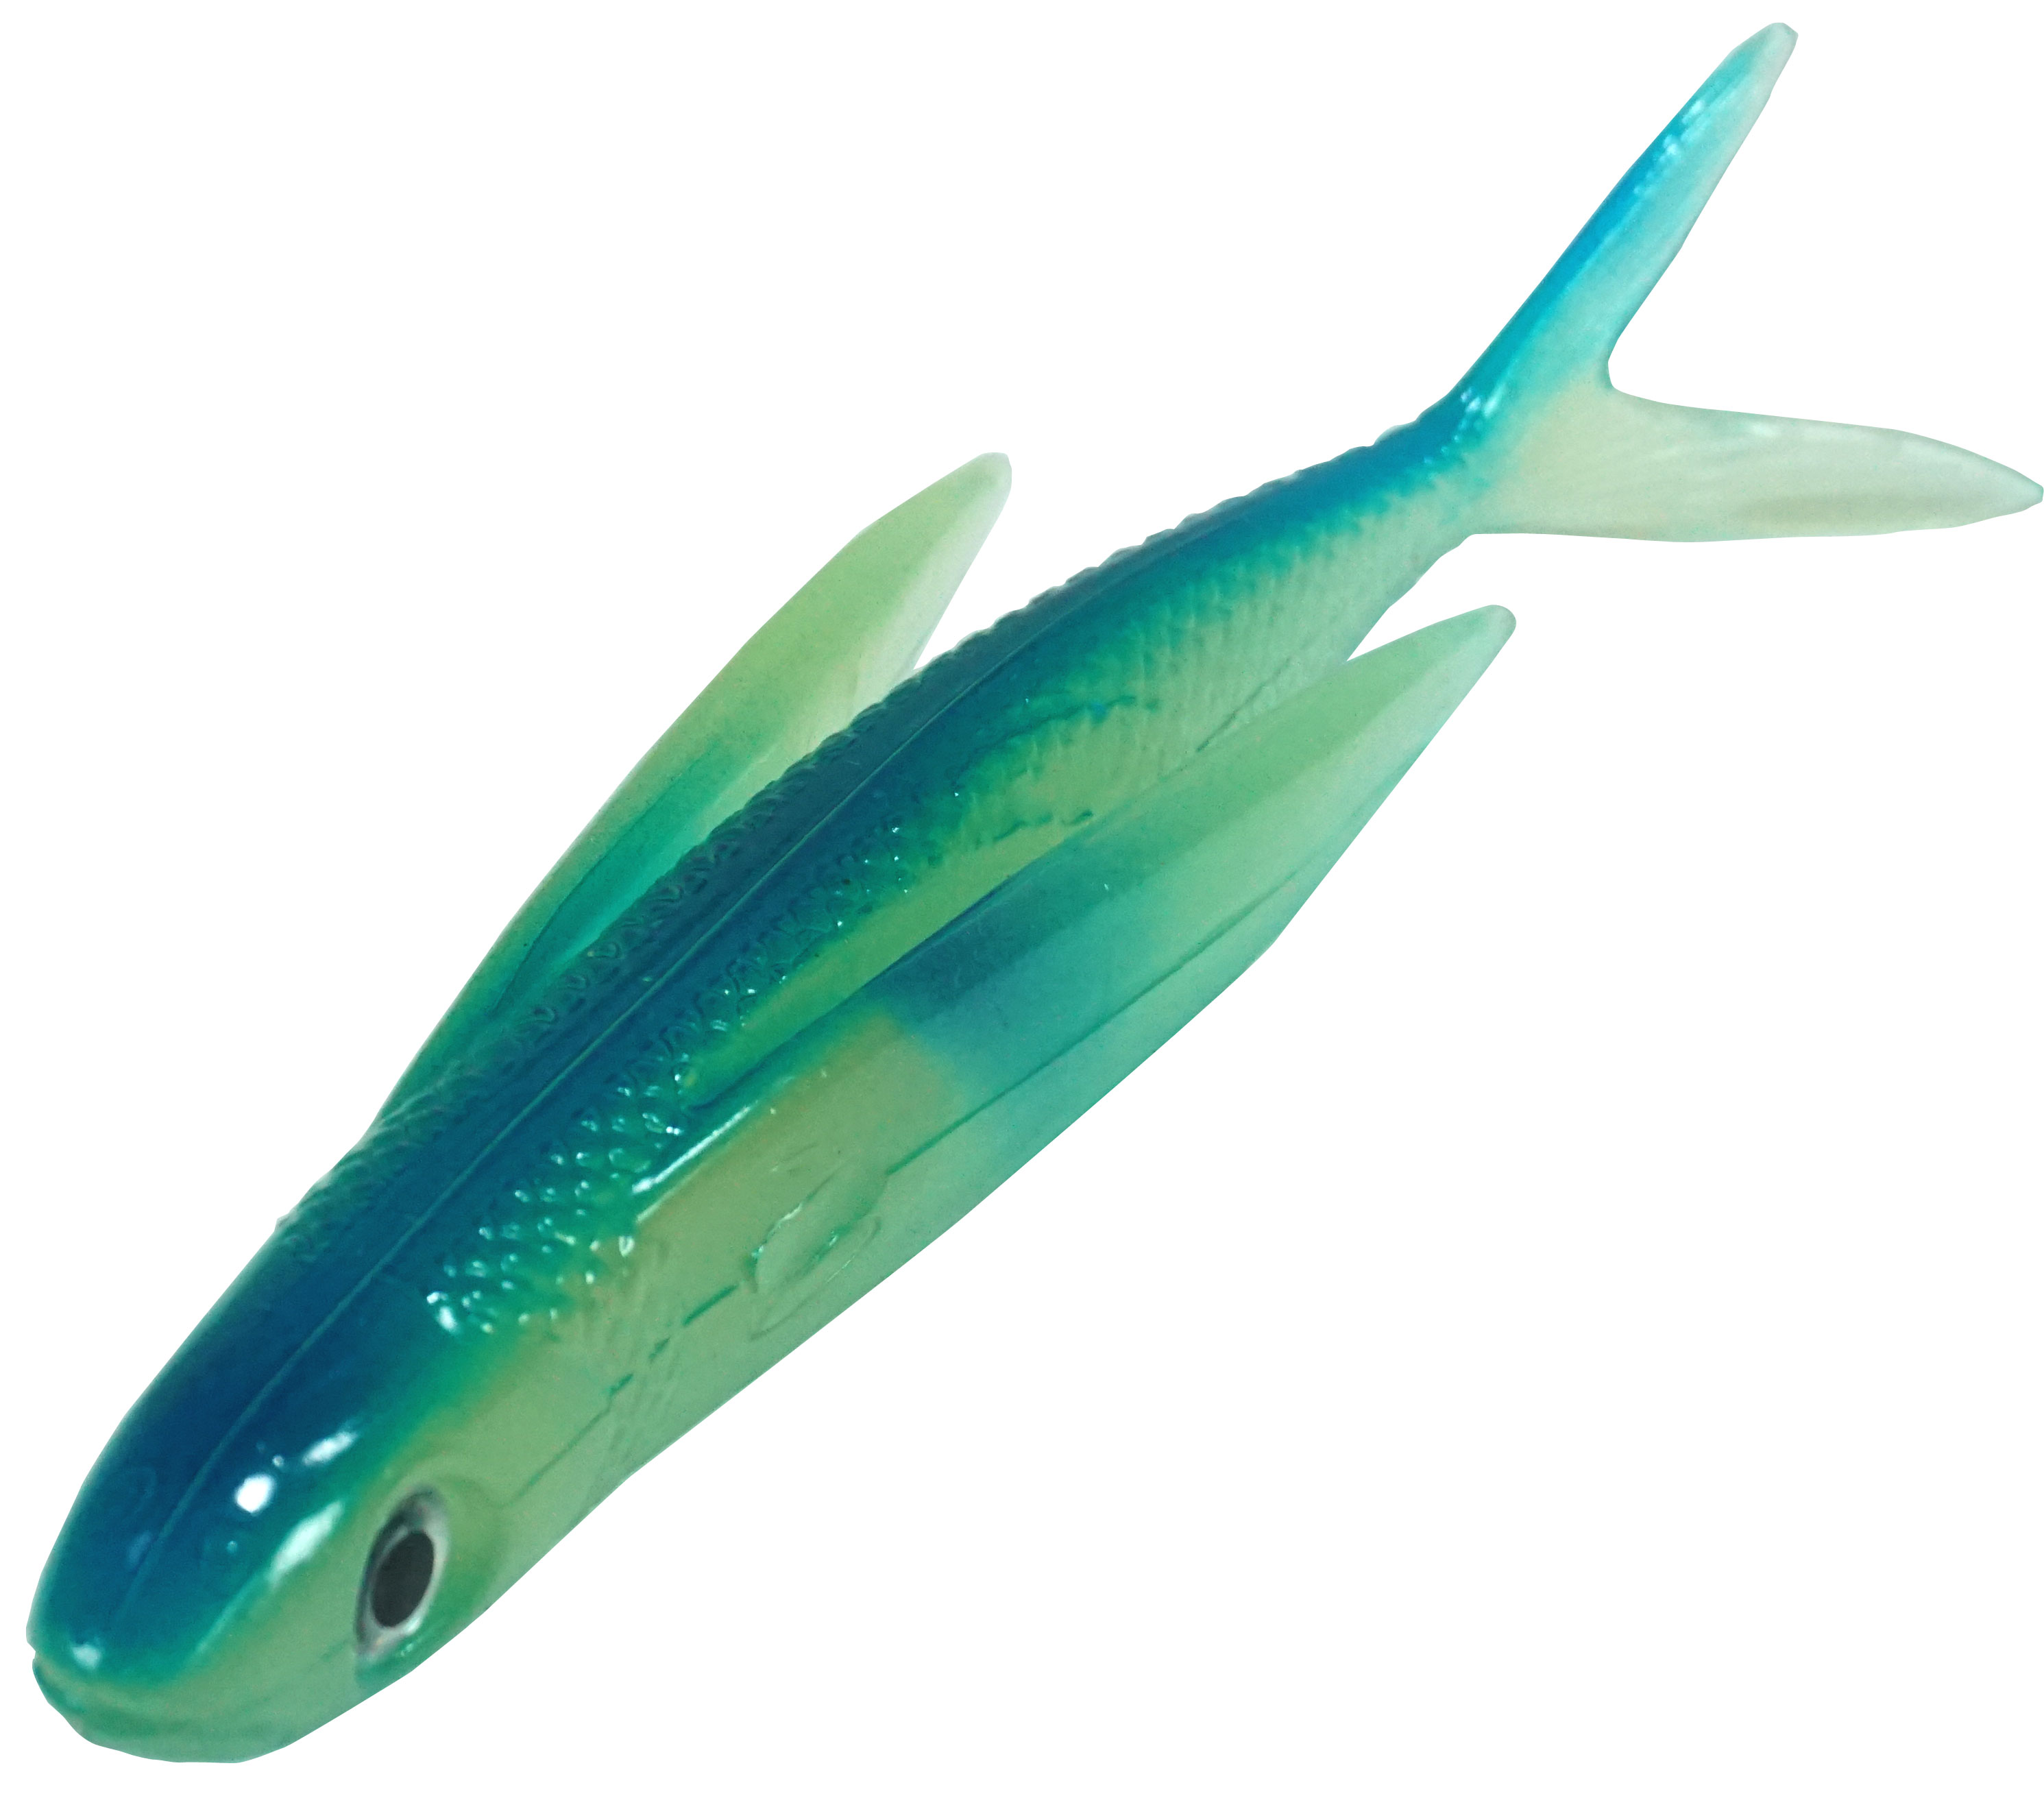 Almost Alive Lures 6 Soft Plastic Flying Fish with Swept Back Wing Bait  Bright Blue/Glow [AAFFSB628] - $5.99 : ebasicpower.com, Marine Engine Parts, Fishing Tackle